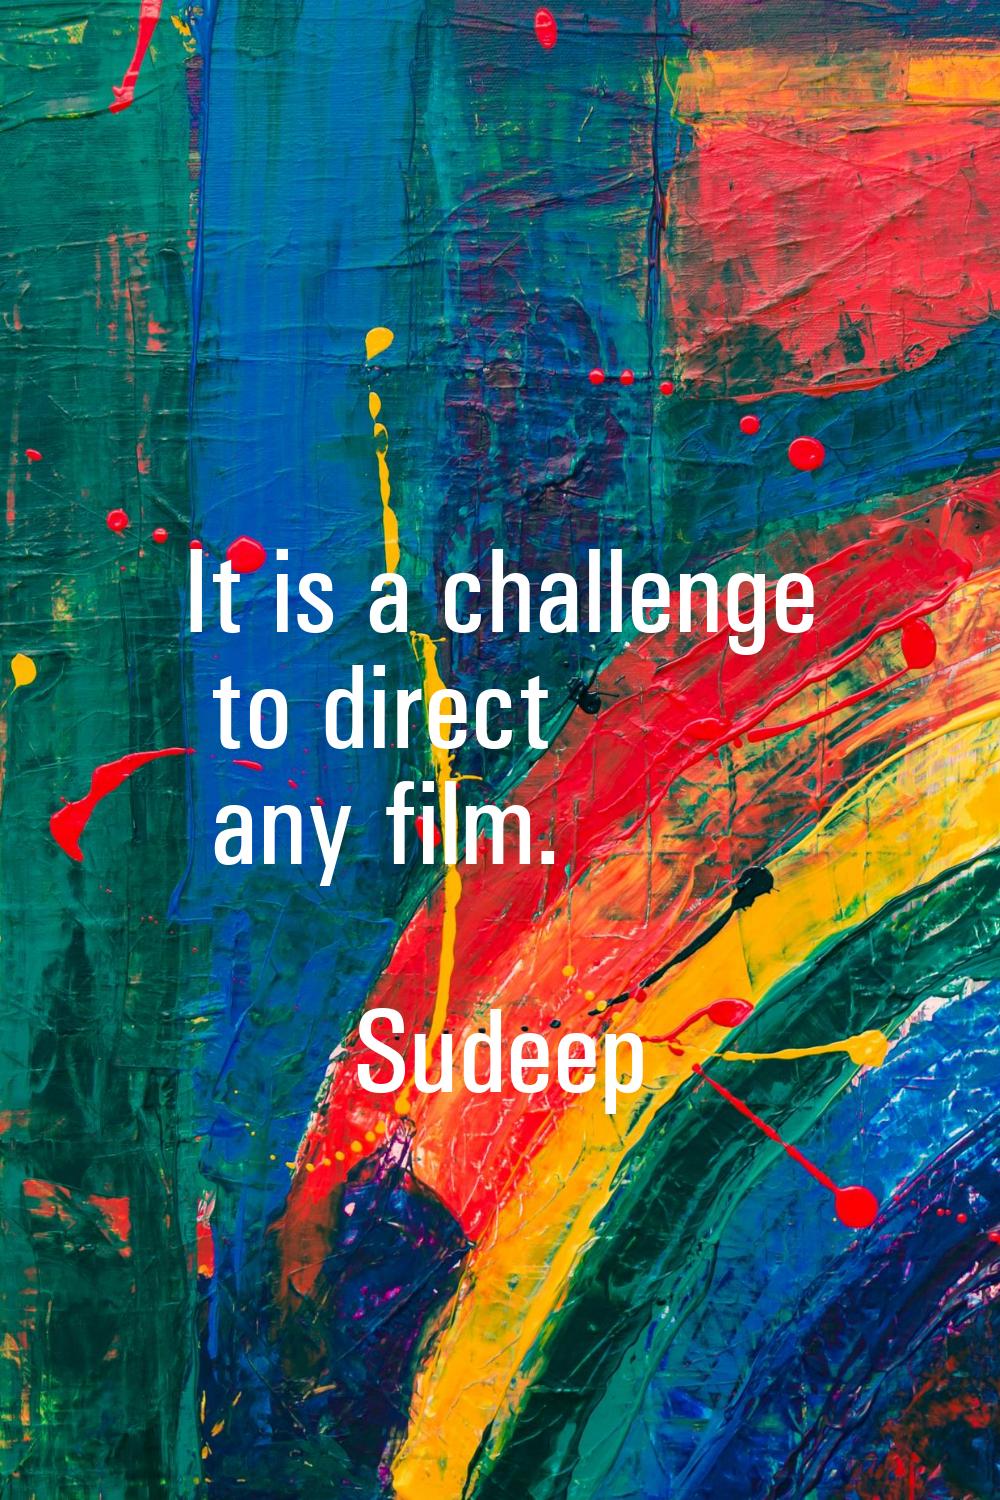 It is a challenge to direct any film.